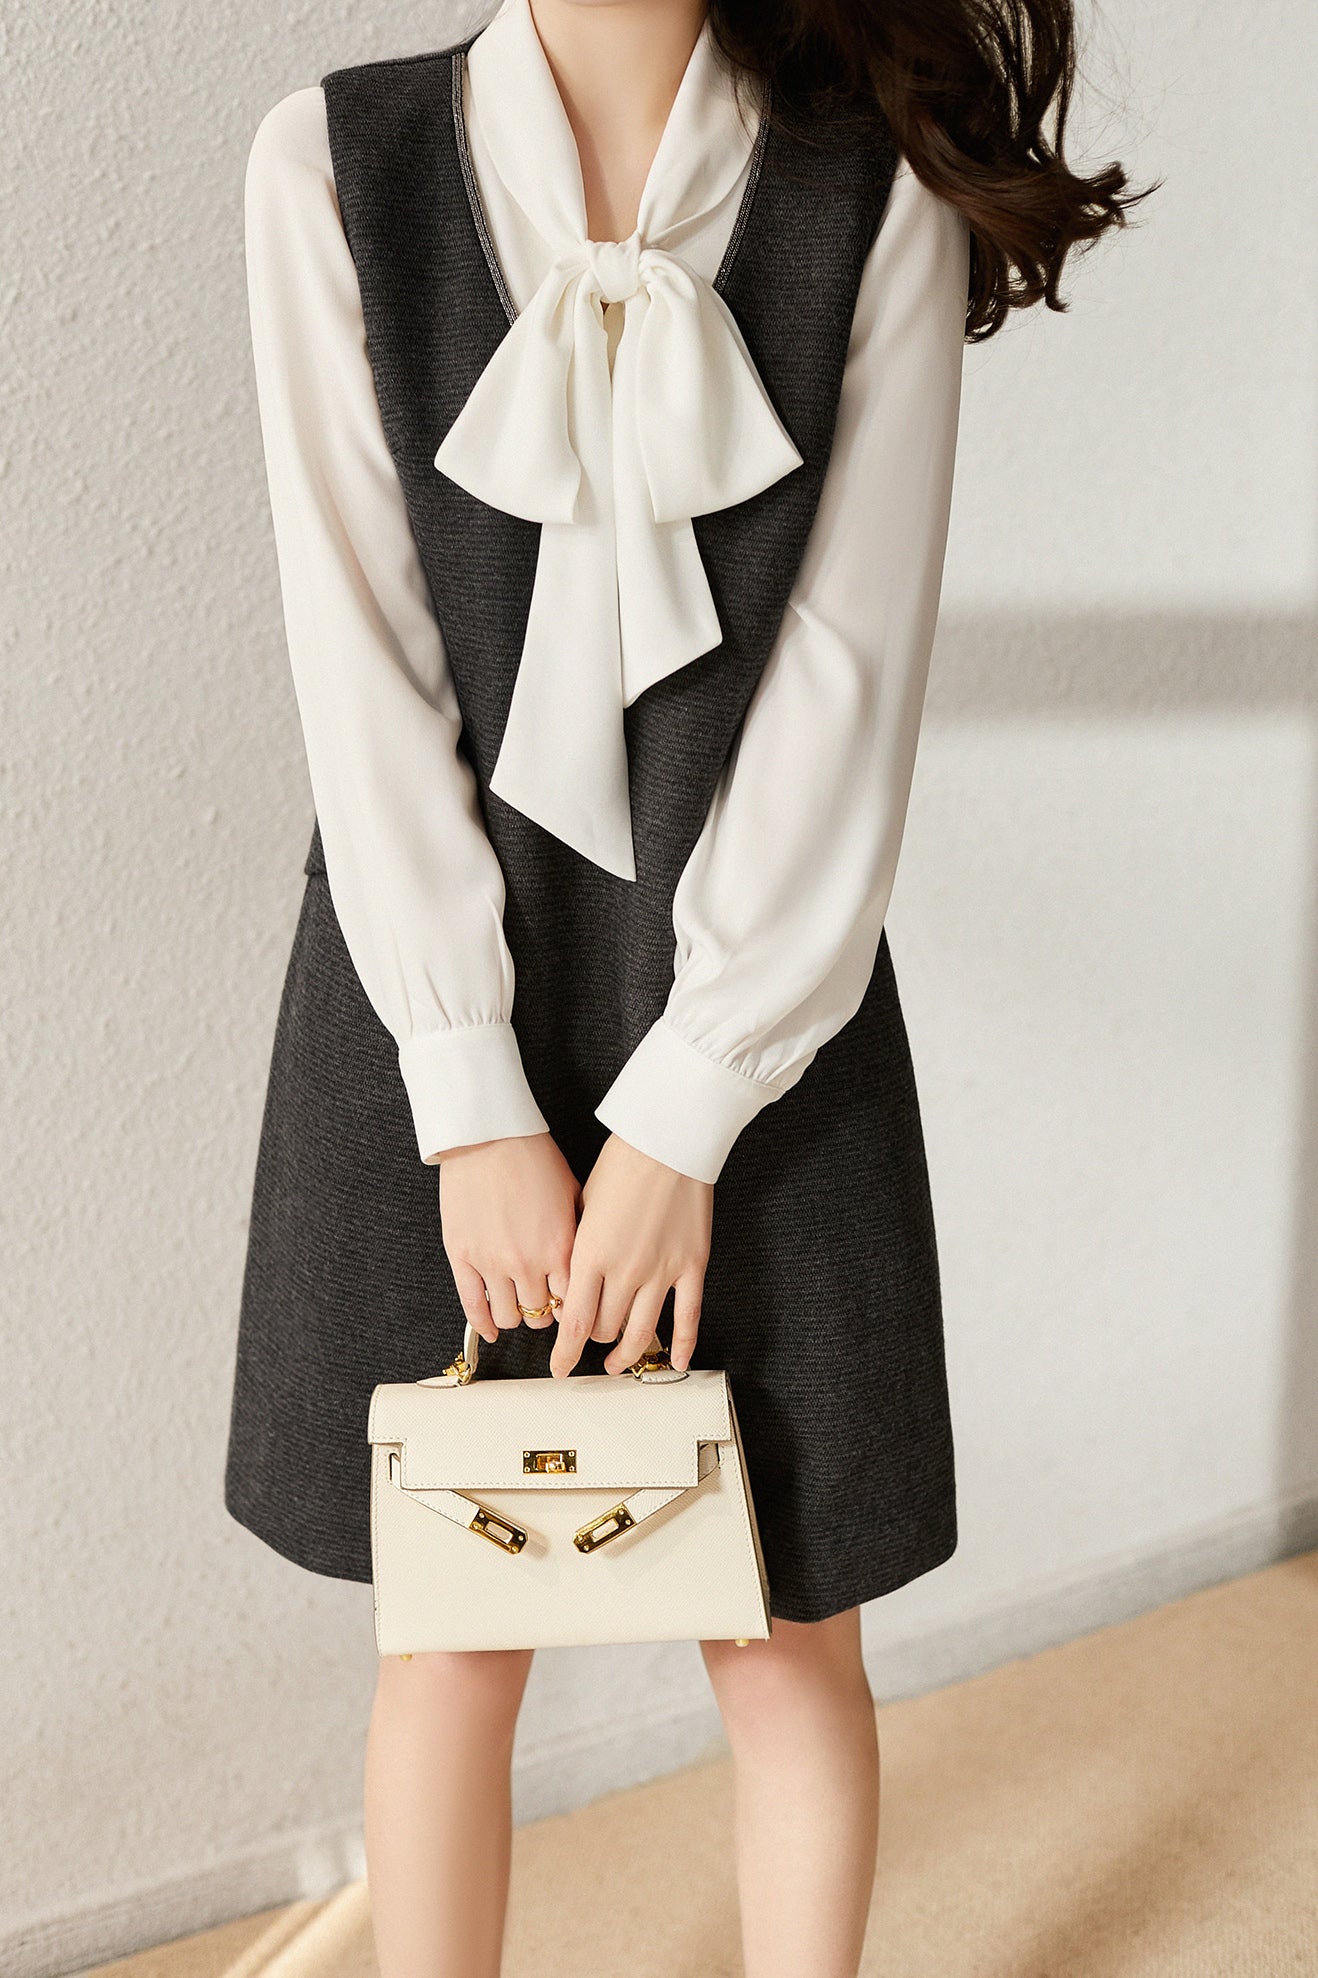 Chanel-style V-neck simple jumper skirt with lining